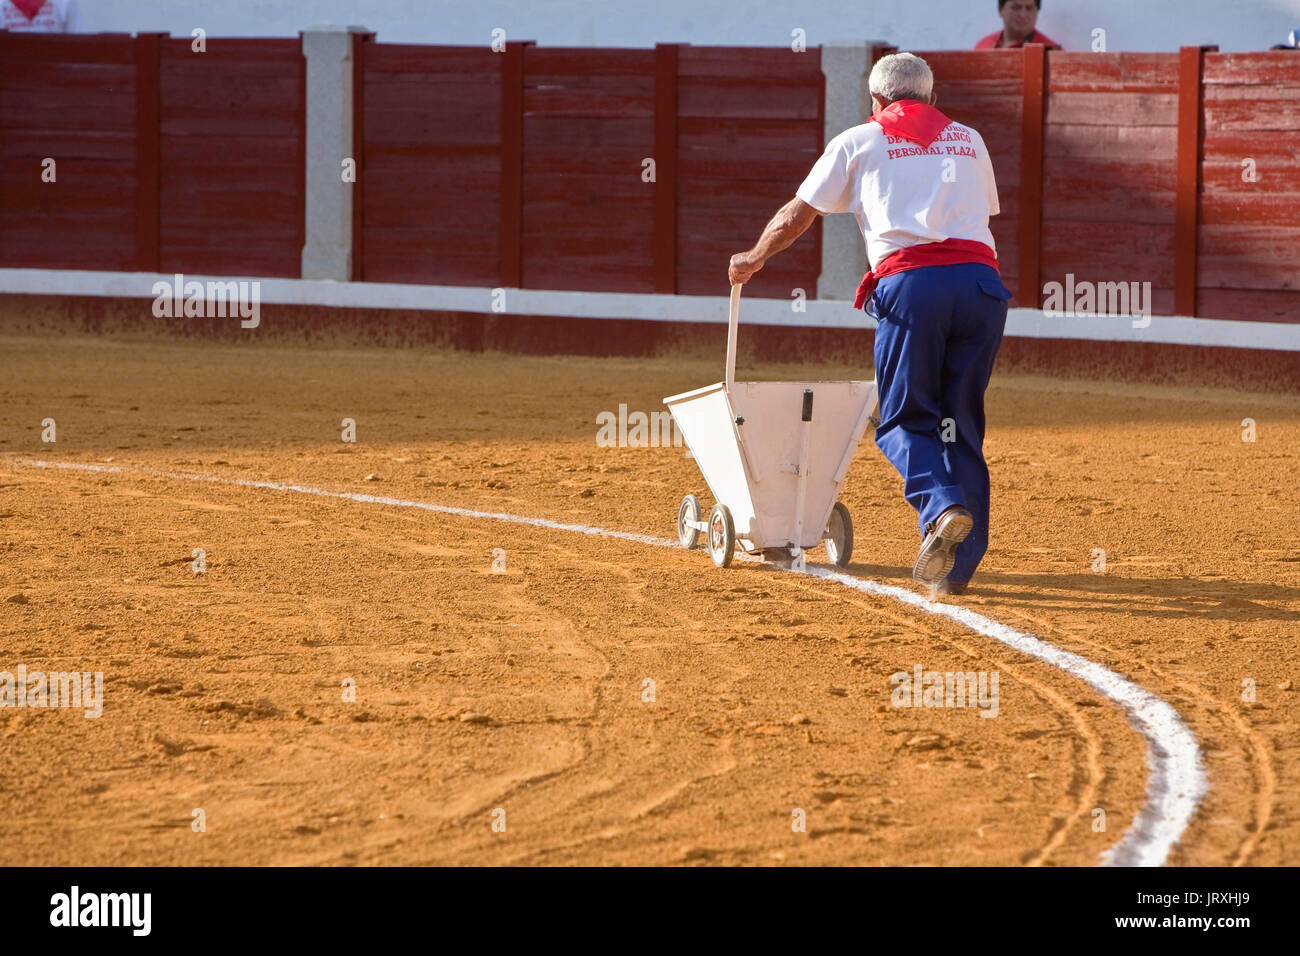 employee of the Bullring painting with a machine the white line of the bullring, Pozoblanco, Spain Stock Photo